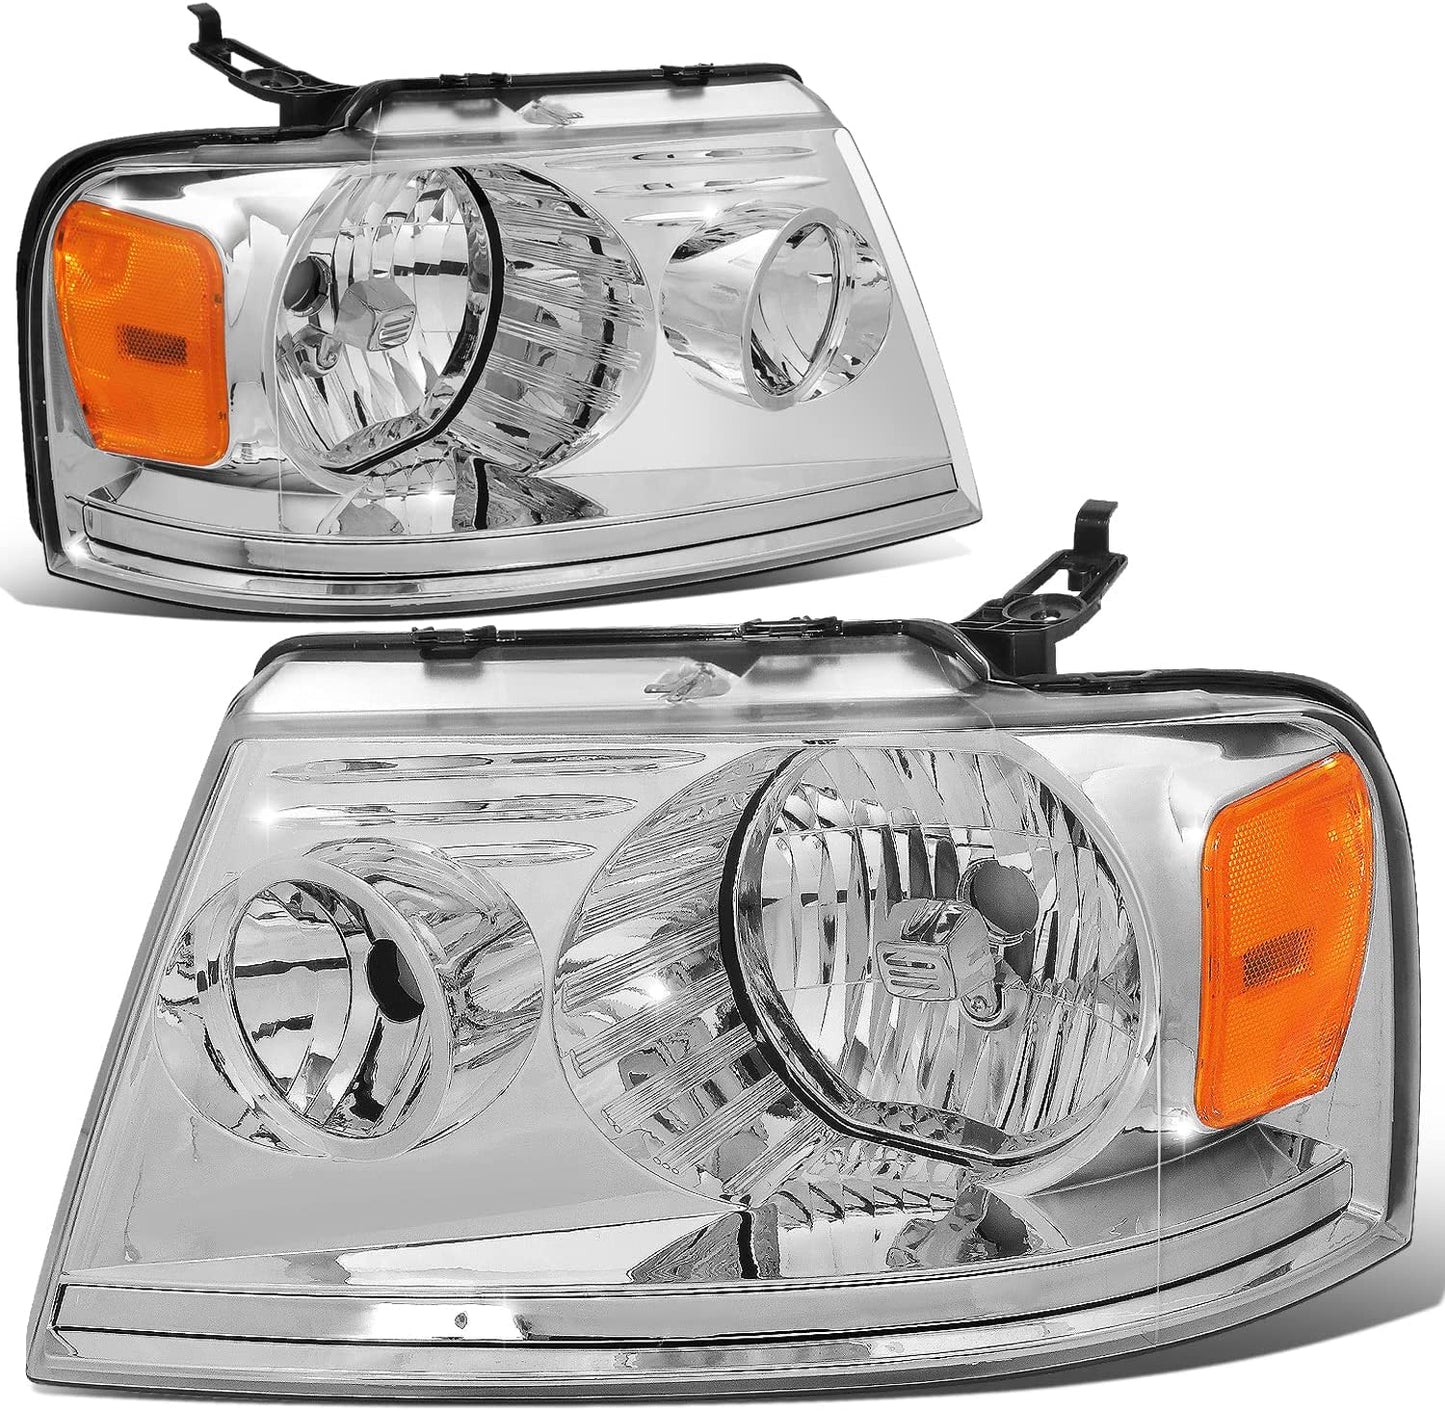 DNA Motoring HL-OH-F1504-CH-AM Headlight Assembly - Driver and Passenger Side